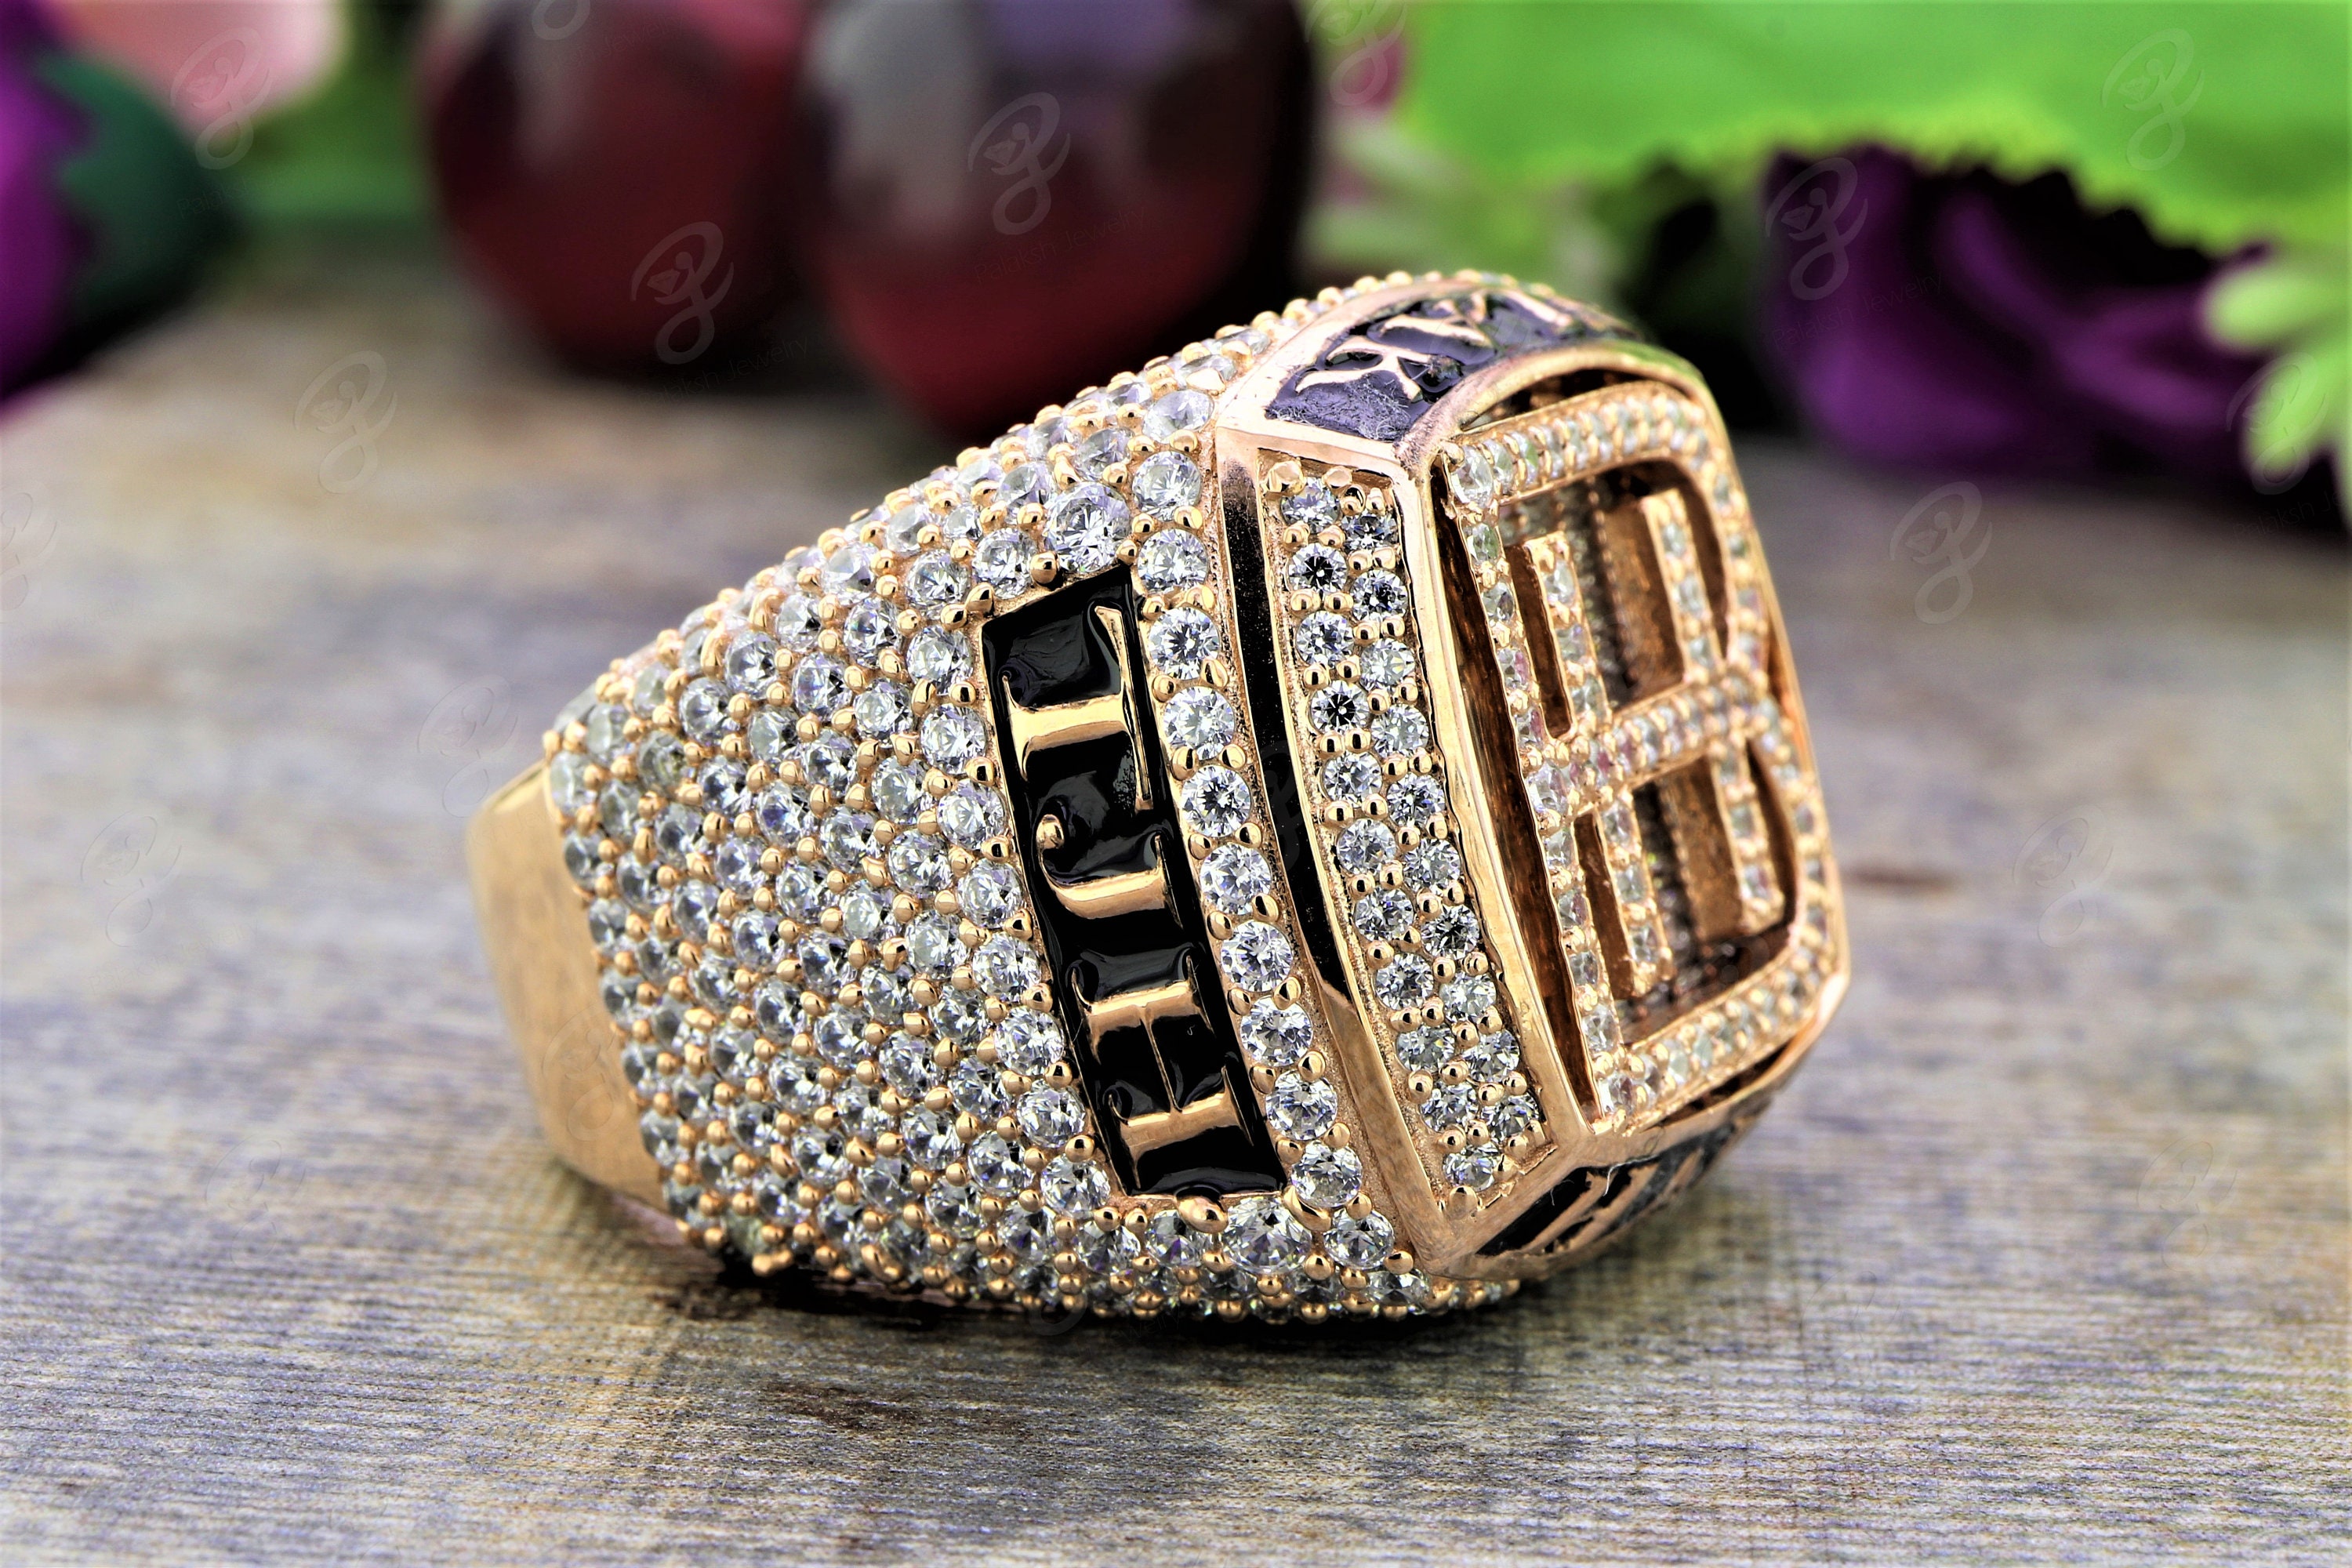 The Sizzling Bling of Golden State Warriors' Championship Rings - Israeli  Diamond Industry